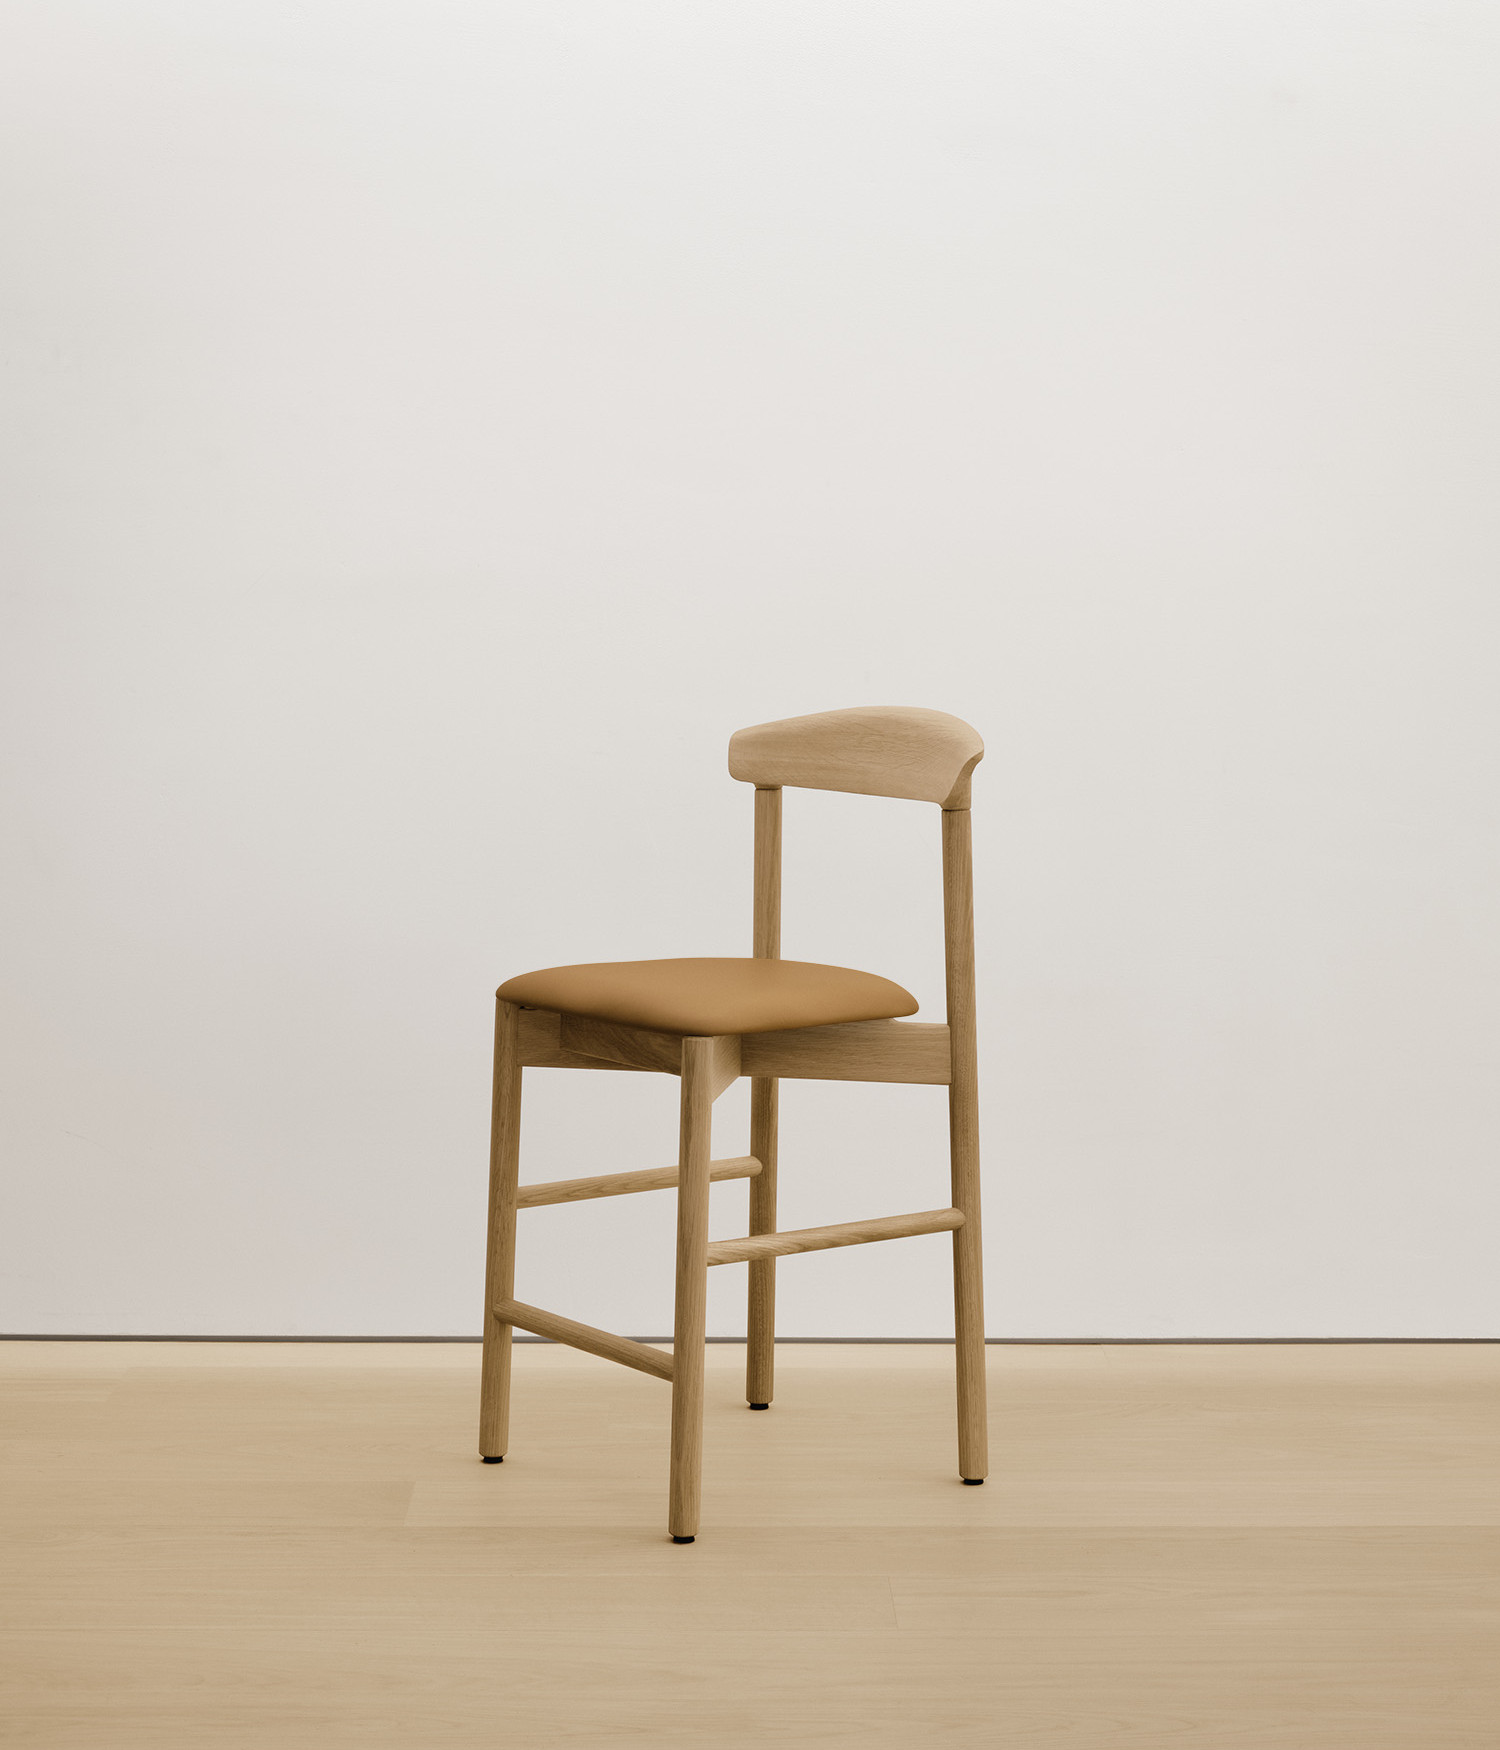  white-oak stool with tan color upholstered seat 